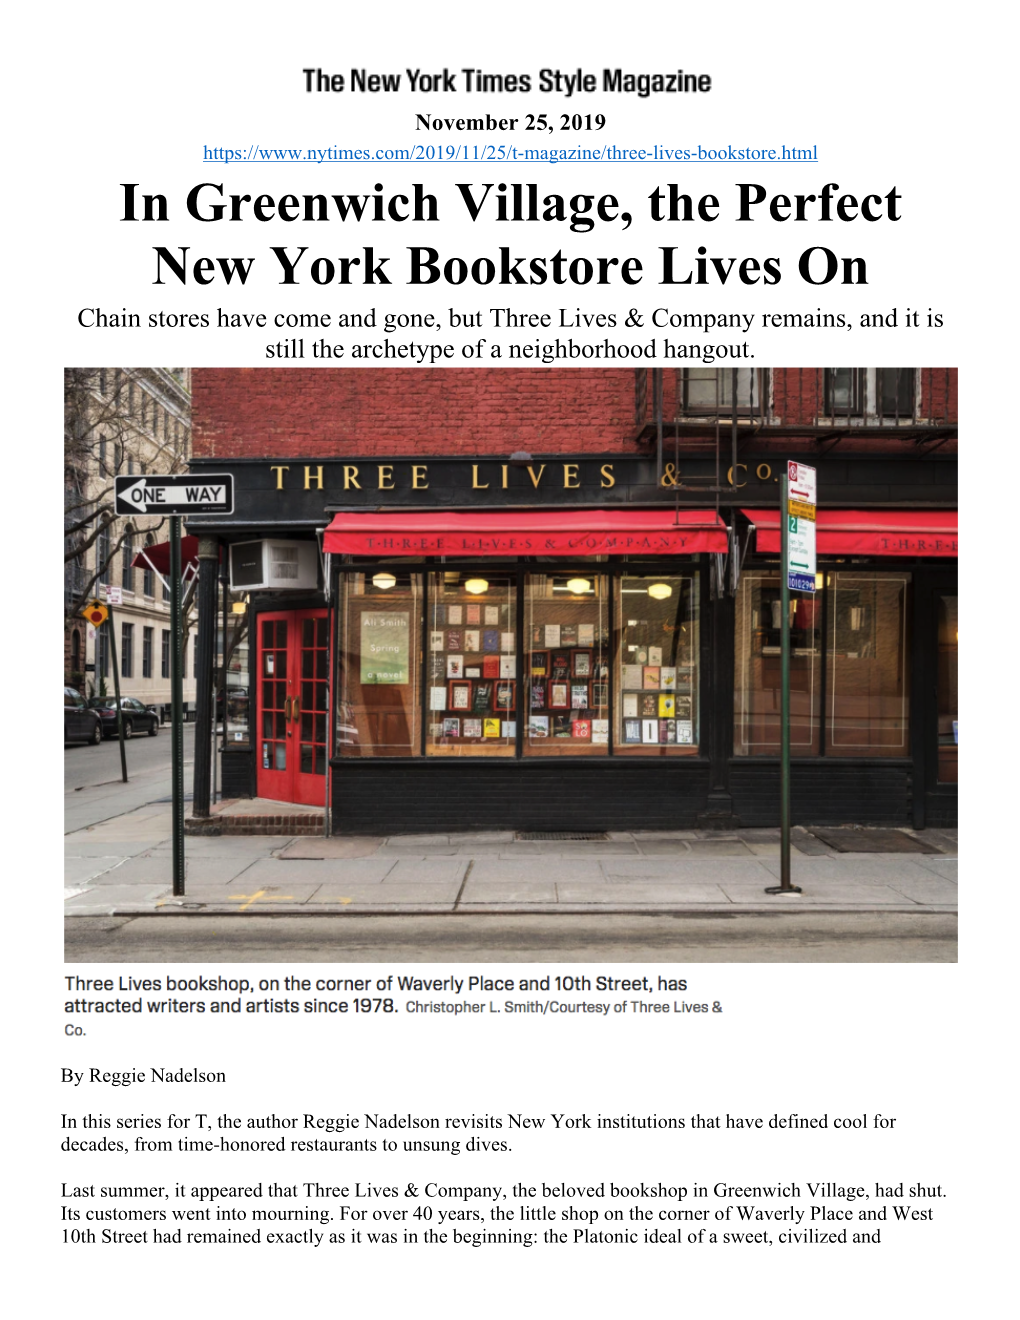 In Greenwich Village, the Perfect New York Bookstore Lives On